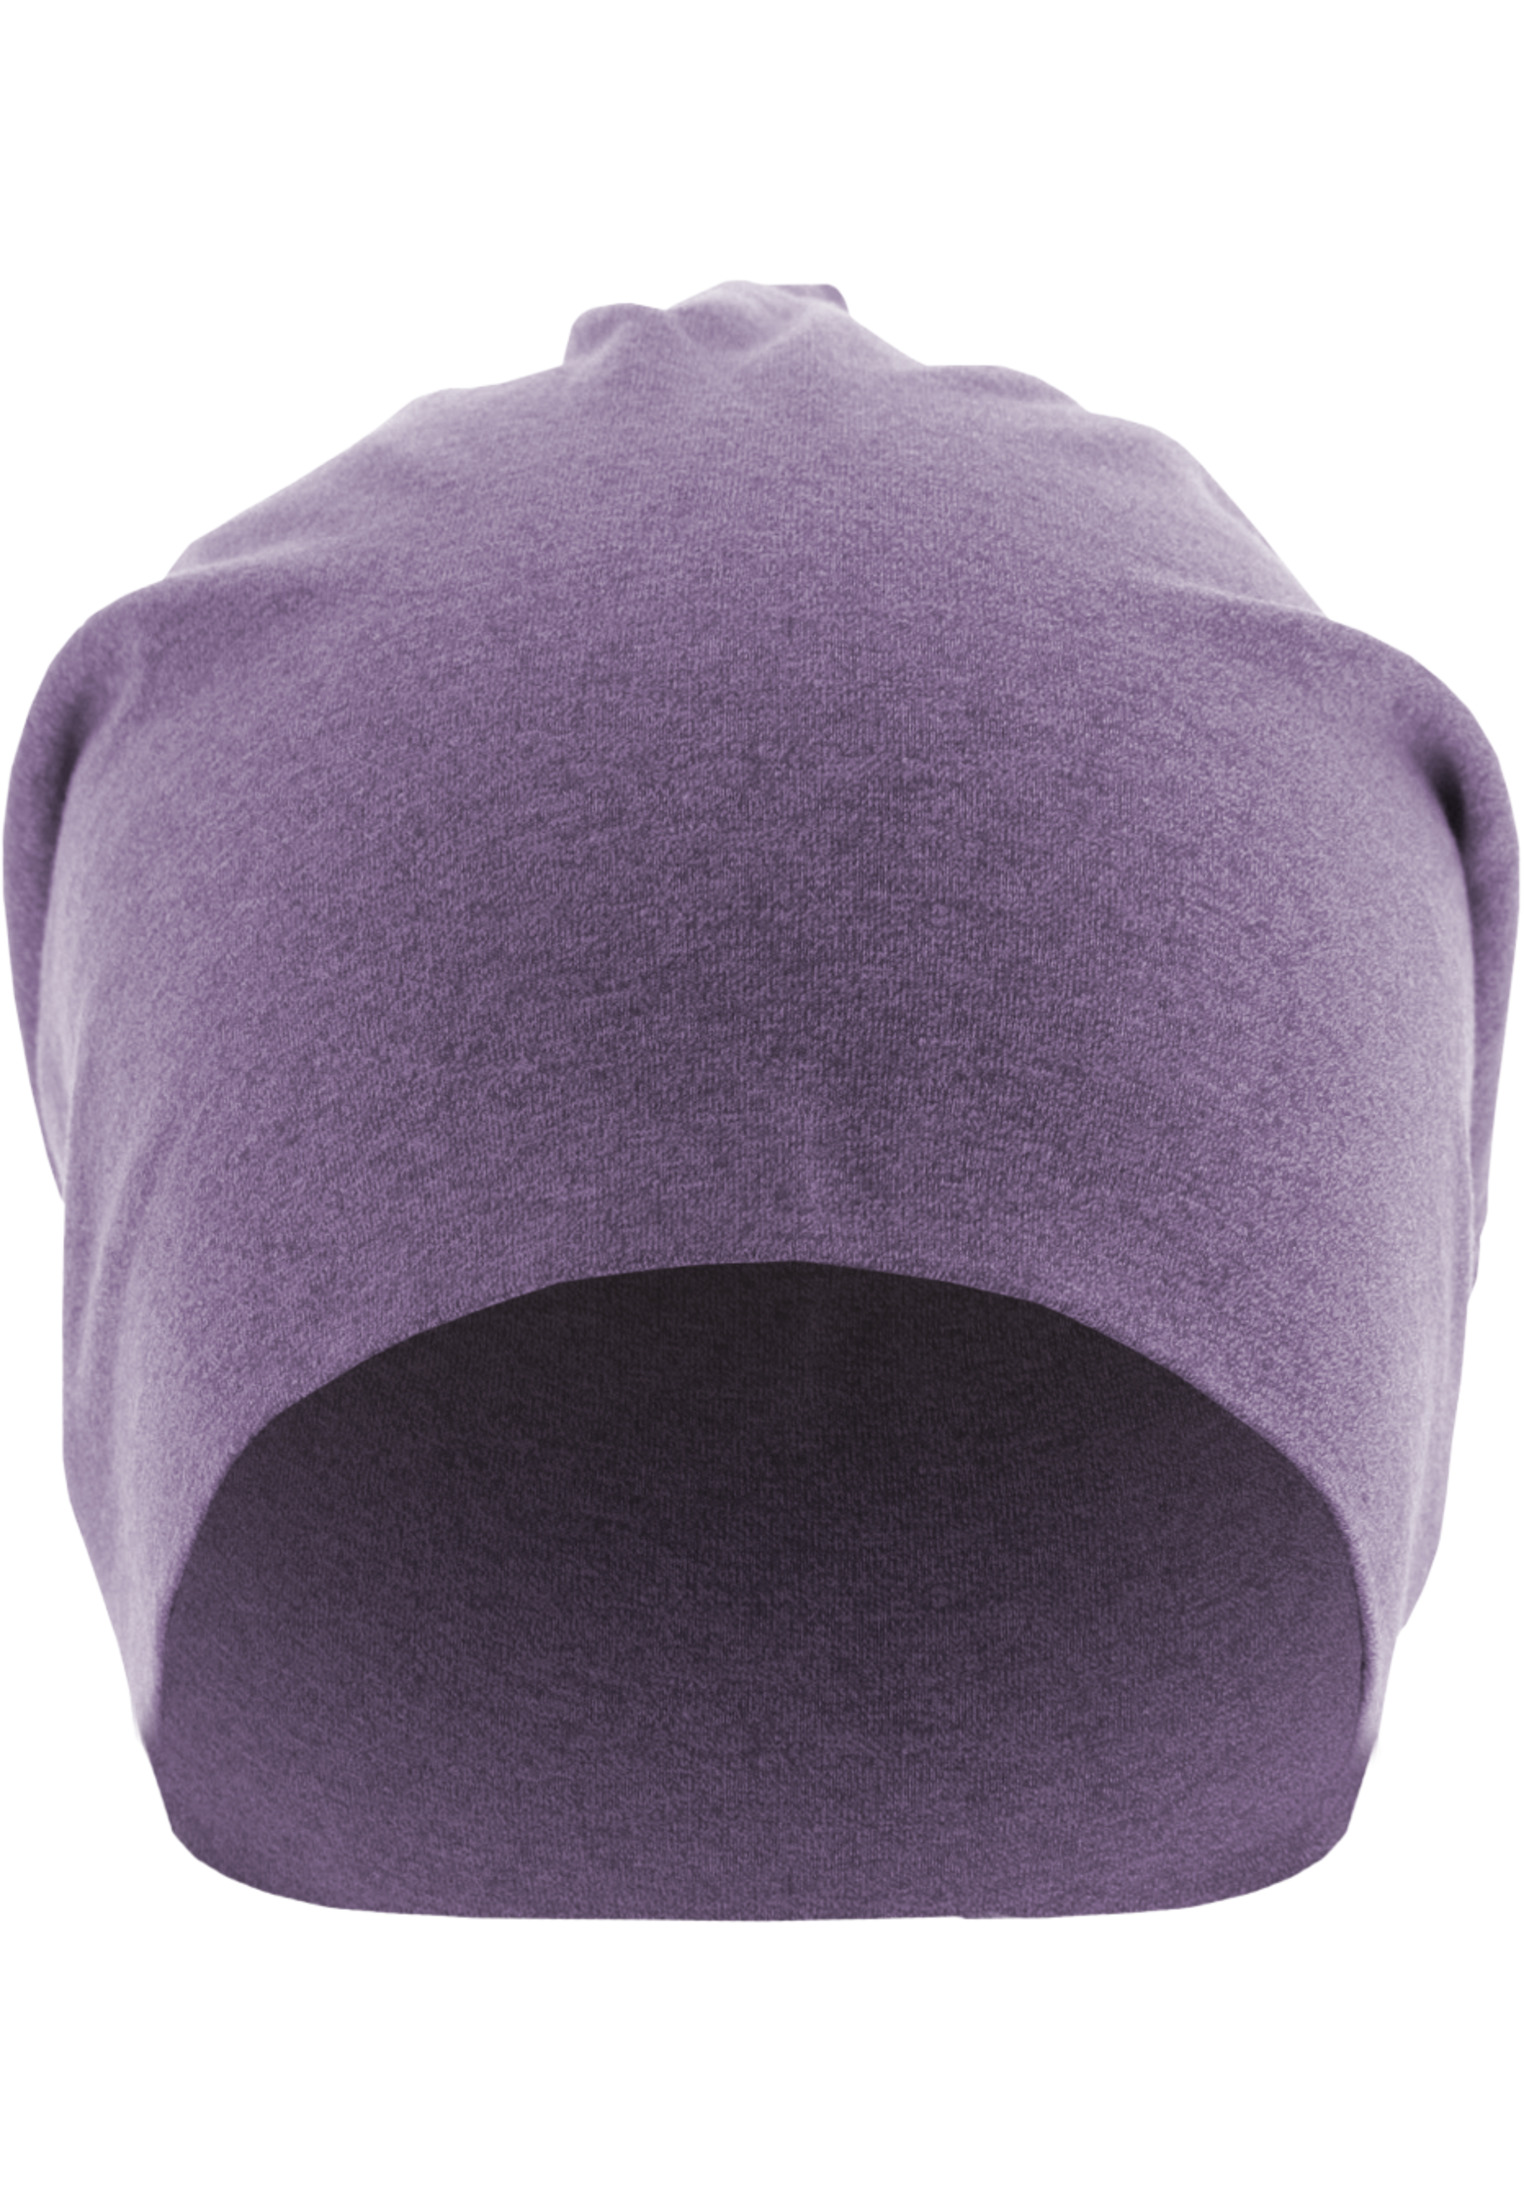 Caps & Beanies Heather Jersey Beanie in Farbe purple